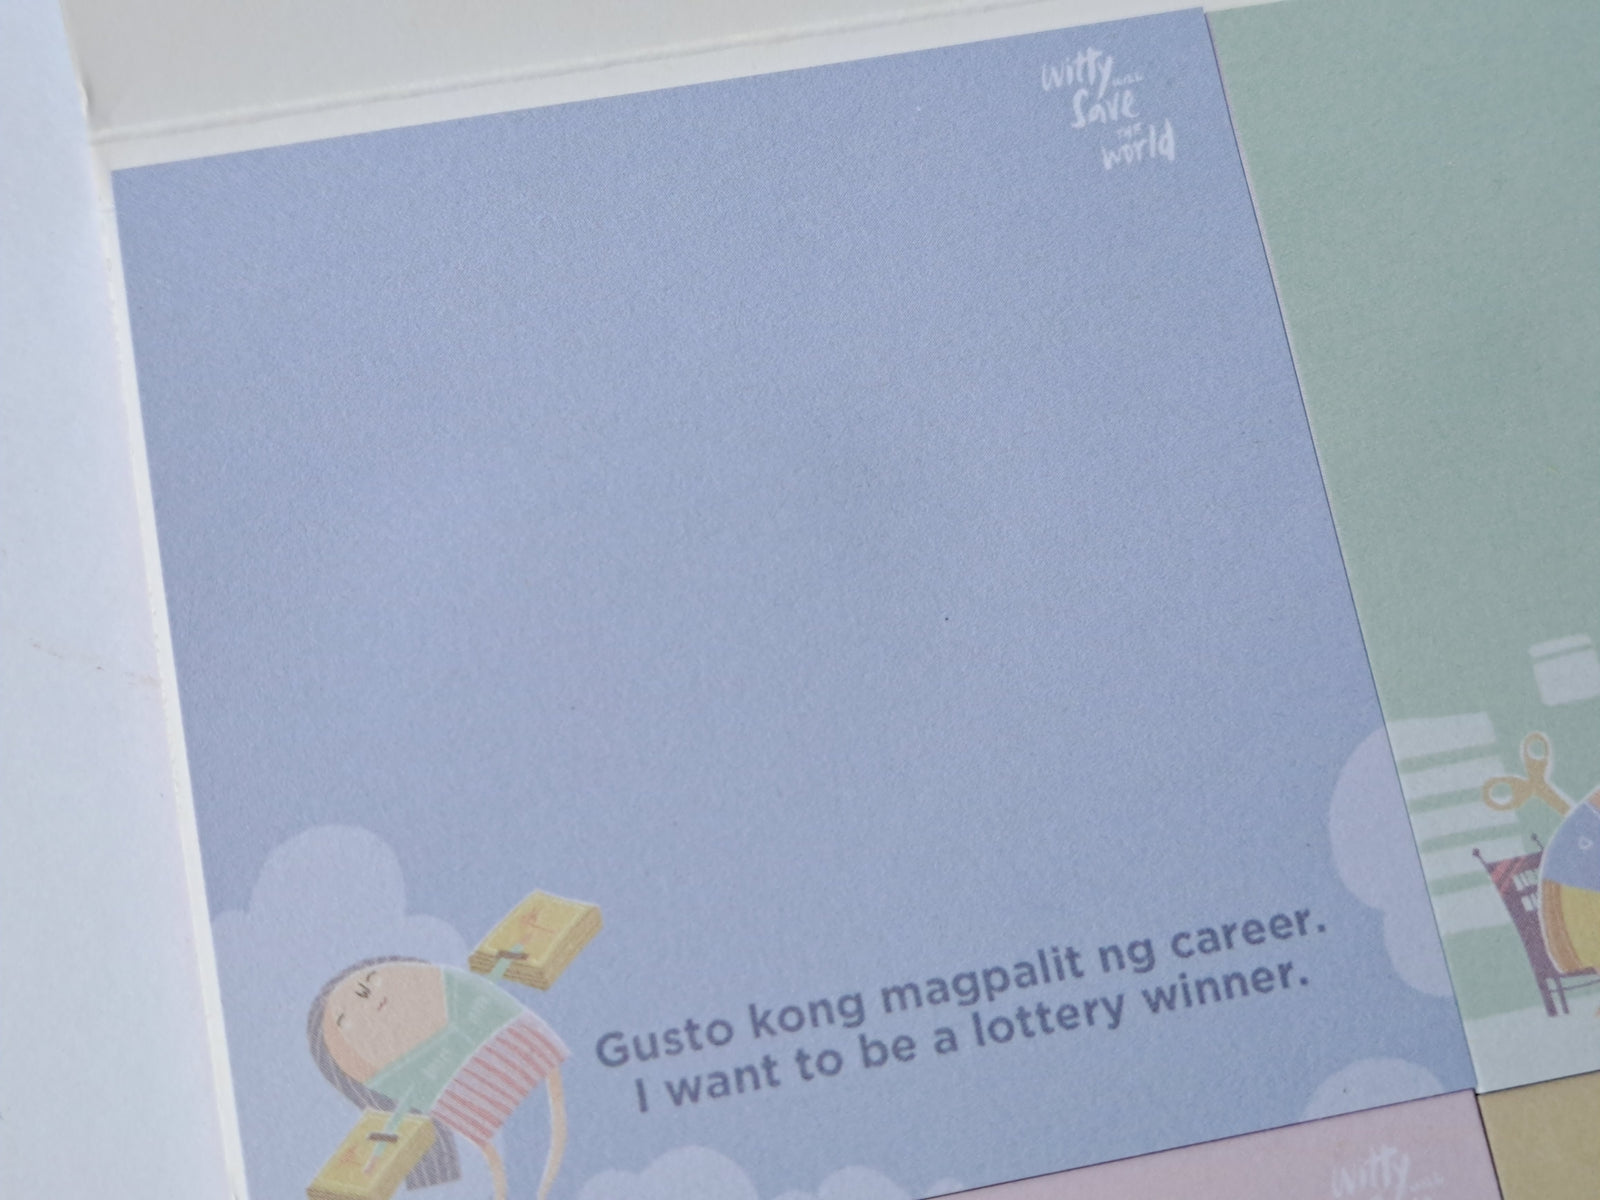 The “Relaks, Stress Lang Yan, Matatapos din in 30-40 Years.” Sticky Notes